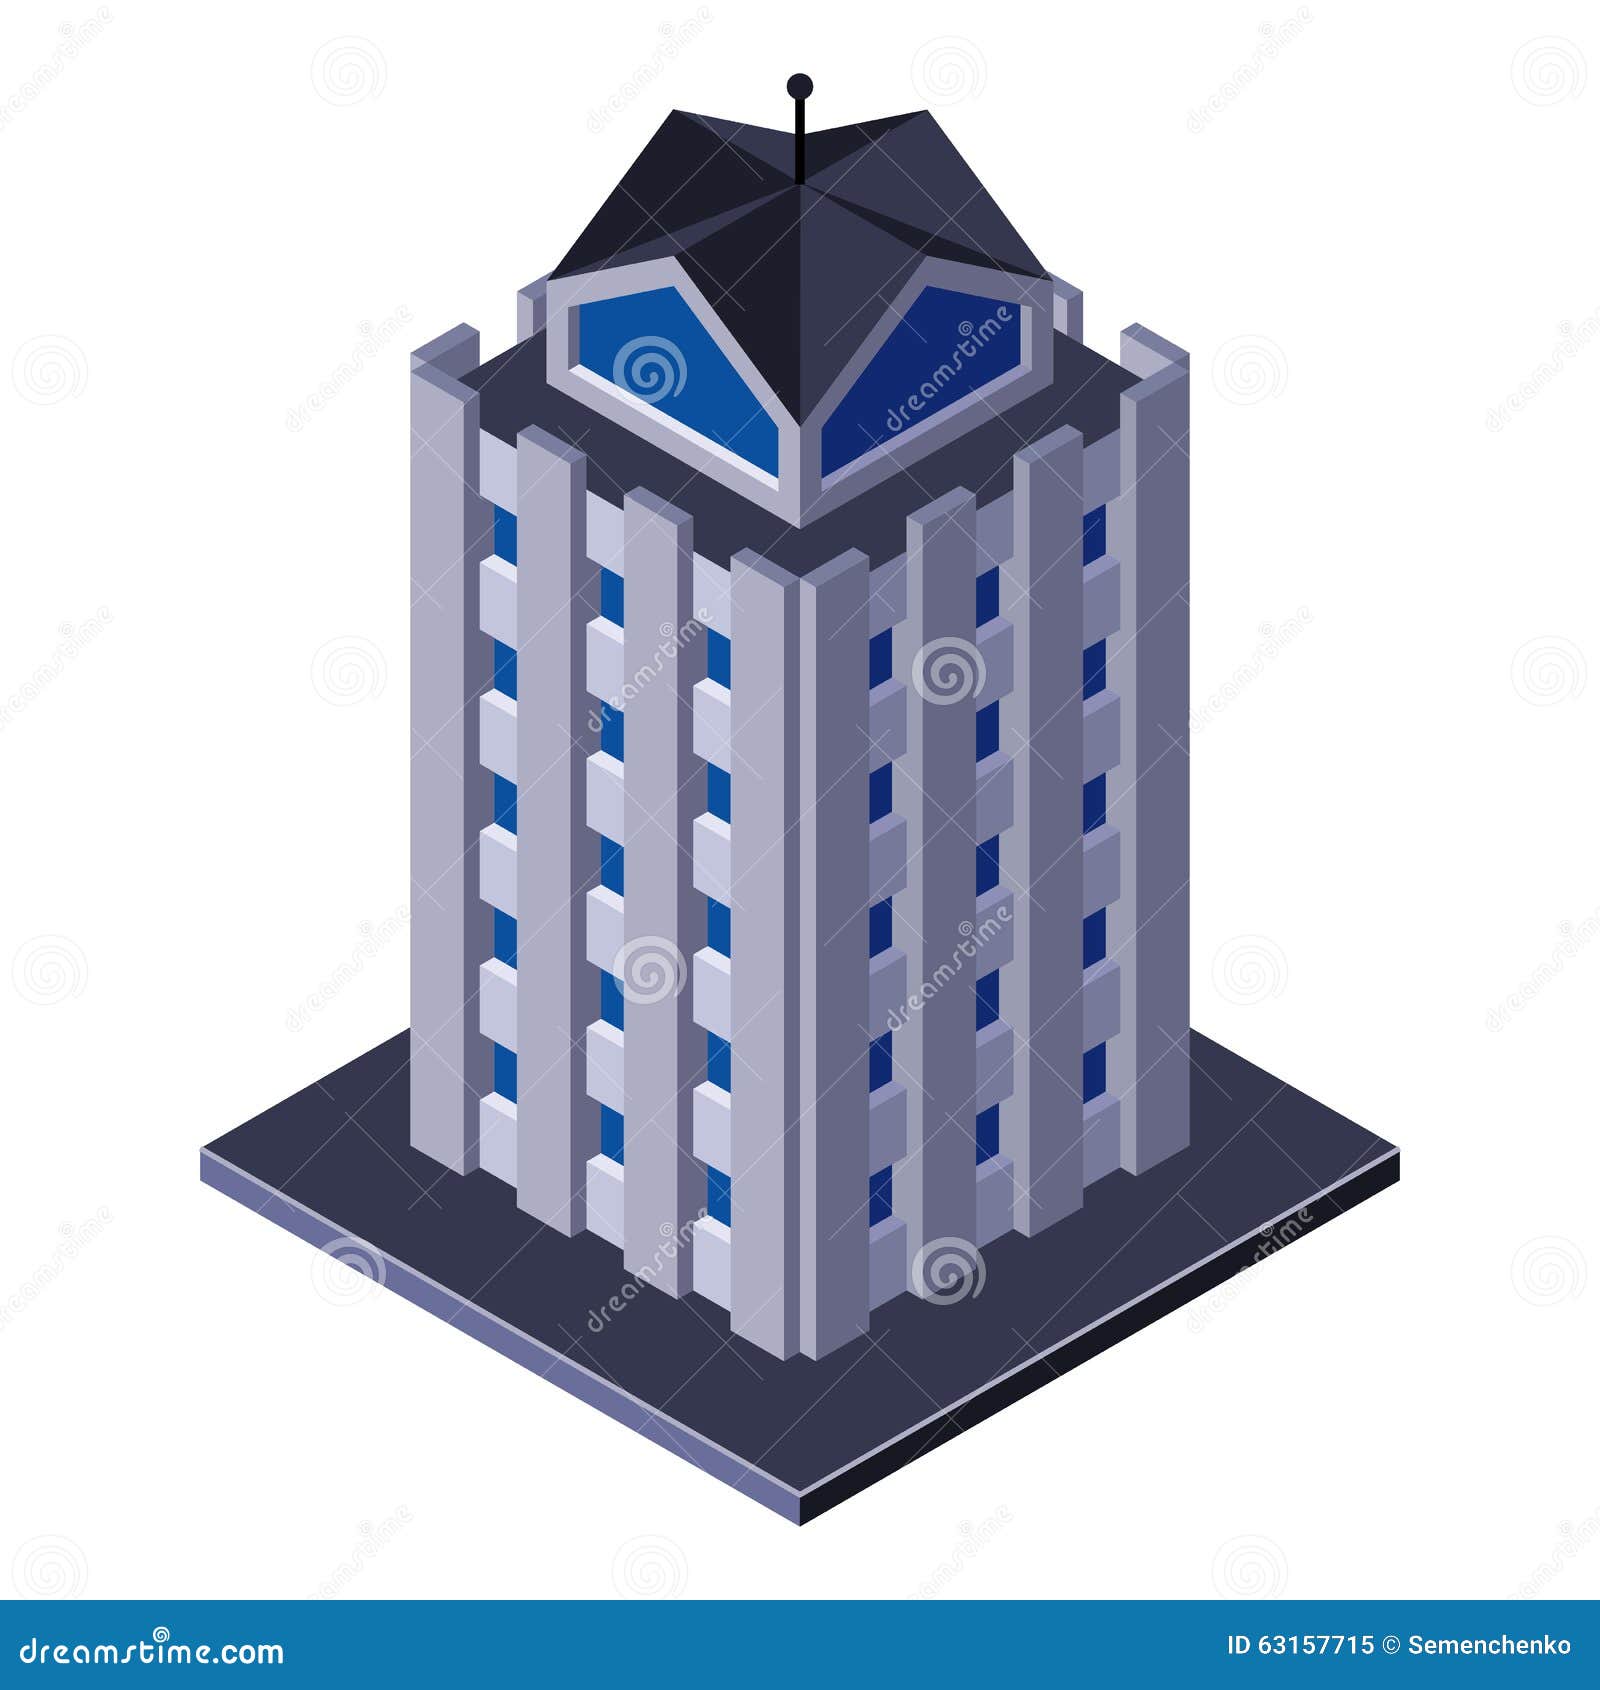 skycraper business center building, office, for real estate brochures or web icon. isometric